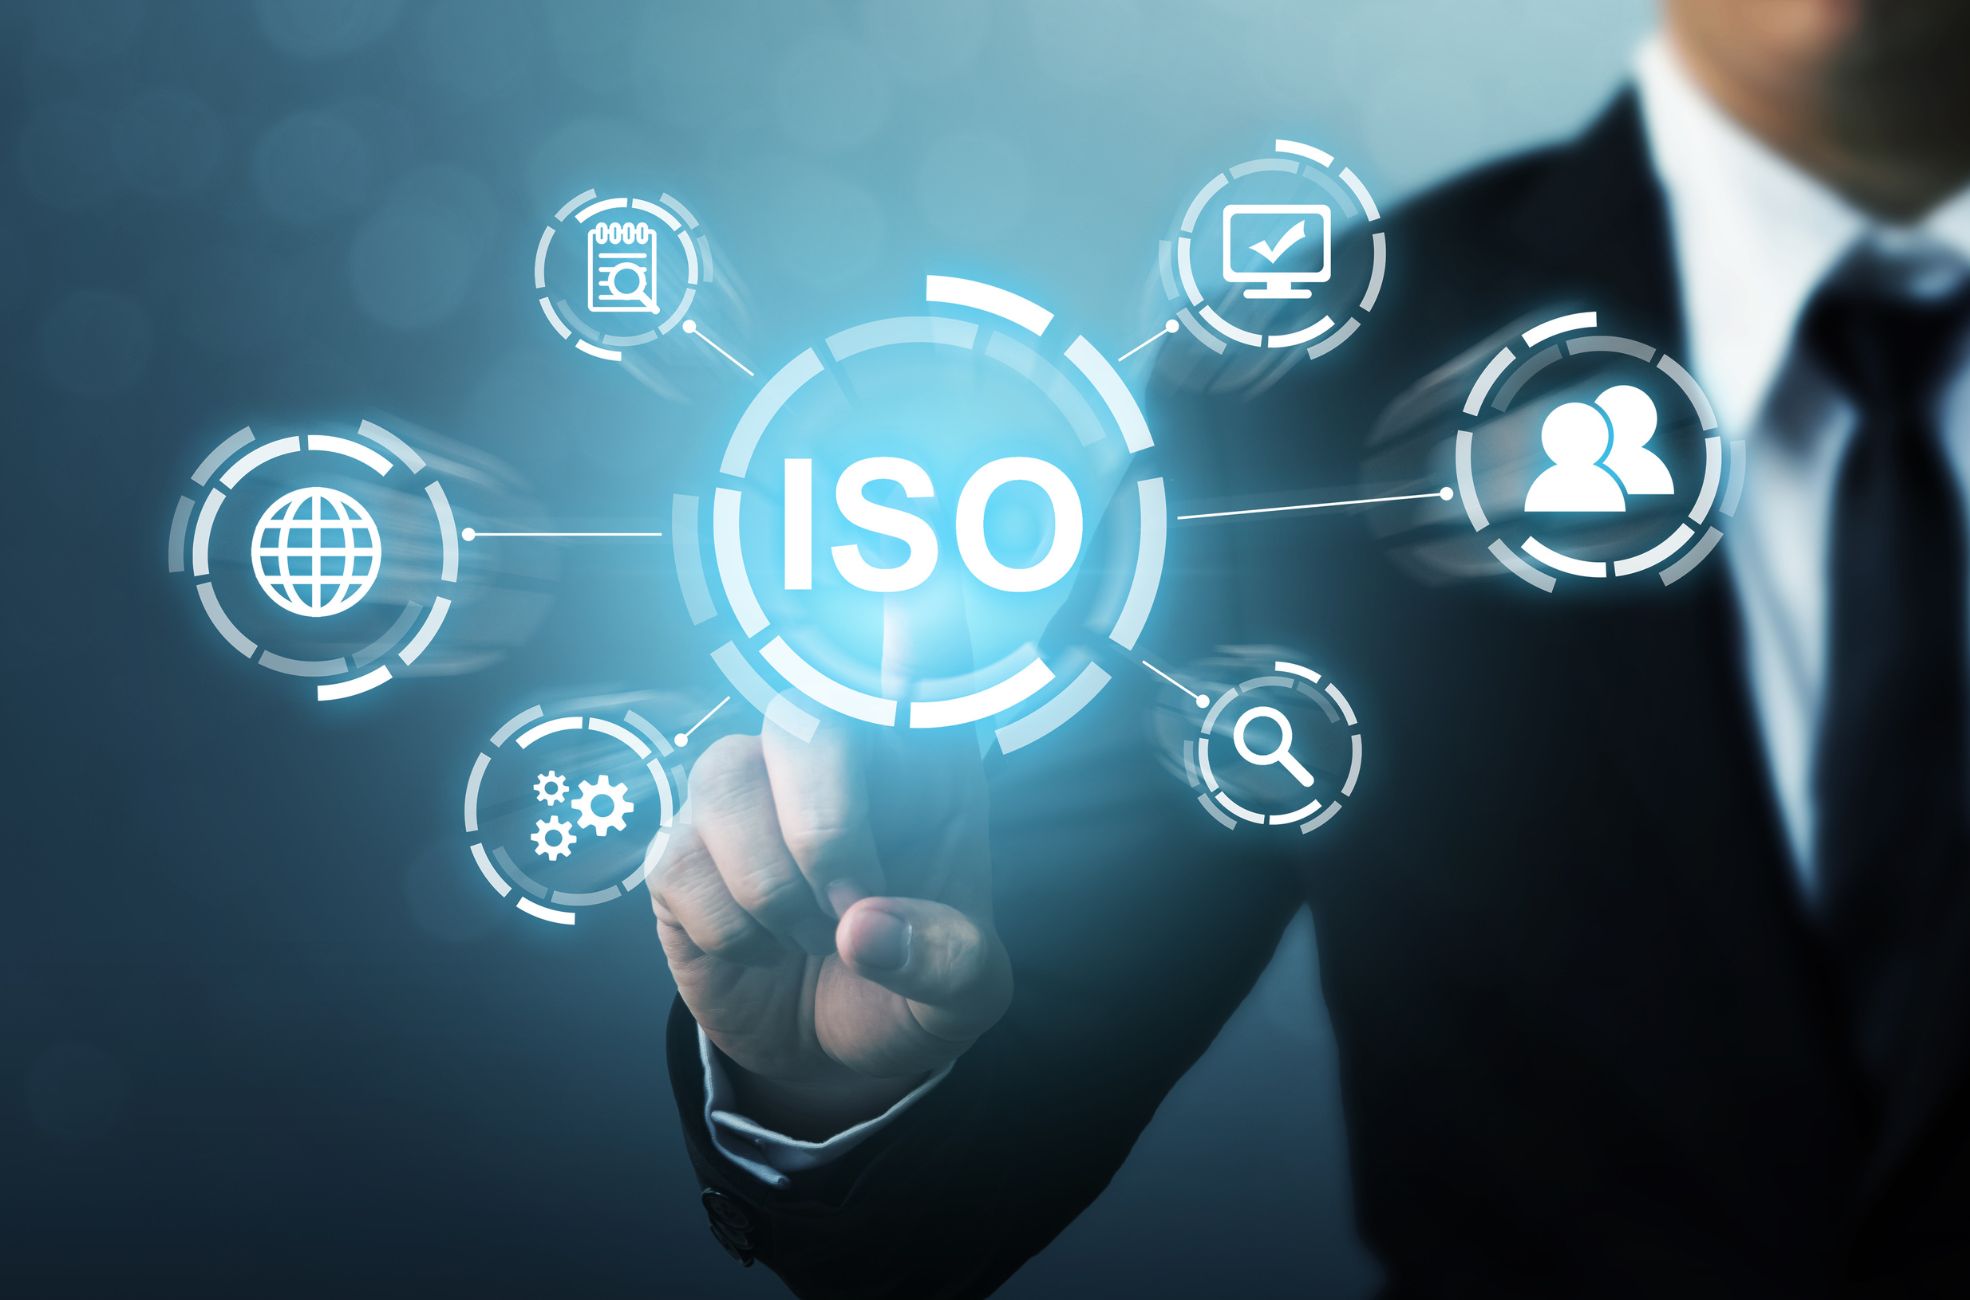 Businessman Pointing To ISO On Screen